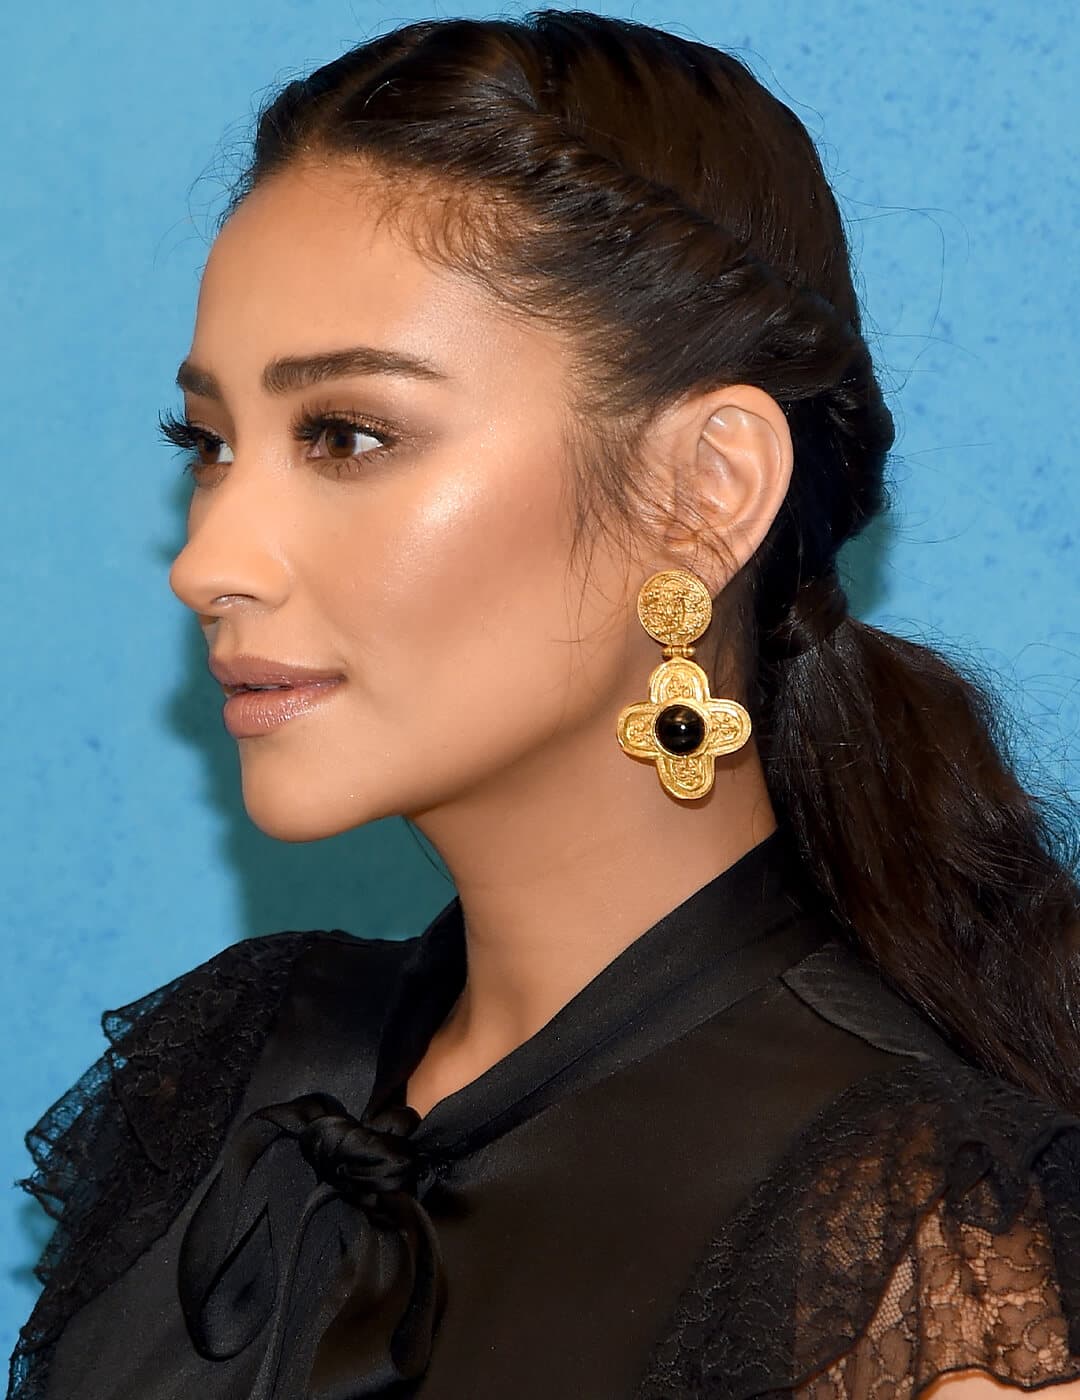 Shay Mitchell rocking a sheer black dress, gold earrings, and twist back ponytail hairstyle